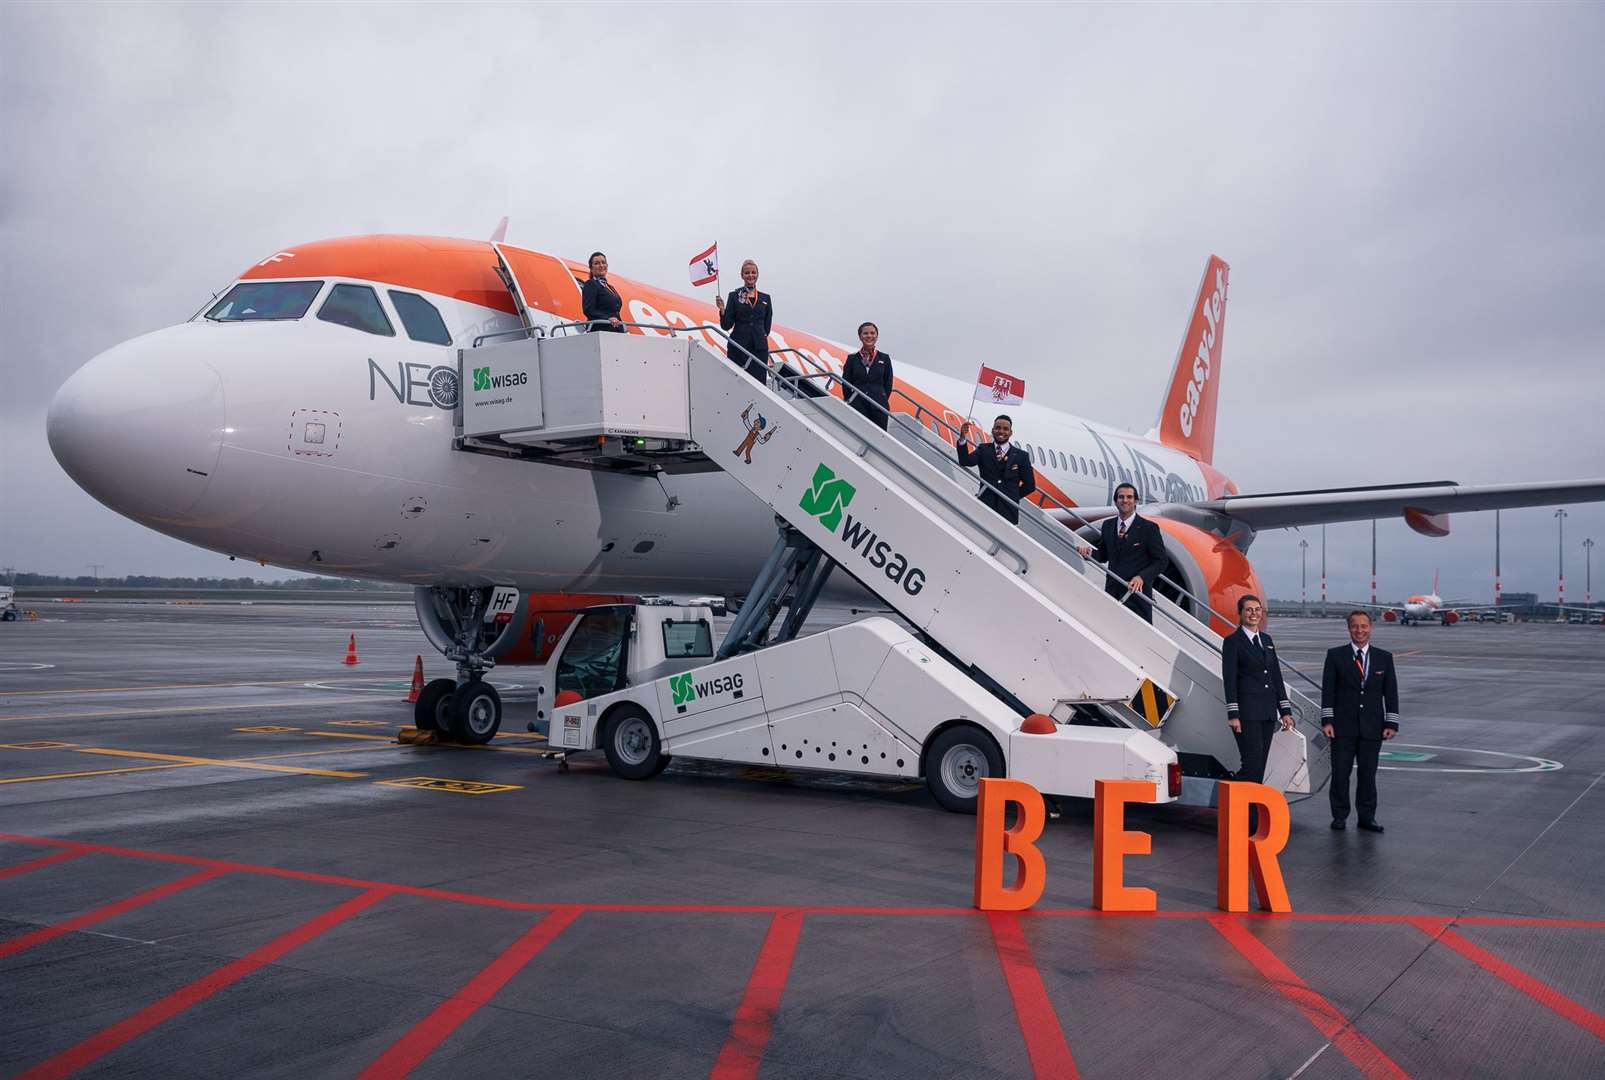 An easyJet aircraft arrived at the new Berlin Brandenburg Willy Brandt Airport on Saturday (easyJet/PA)